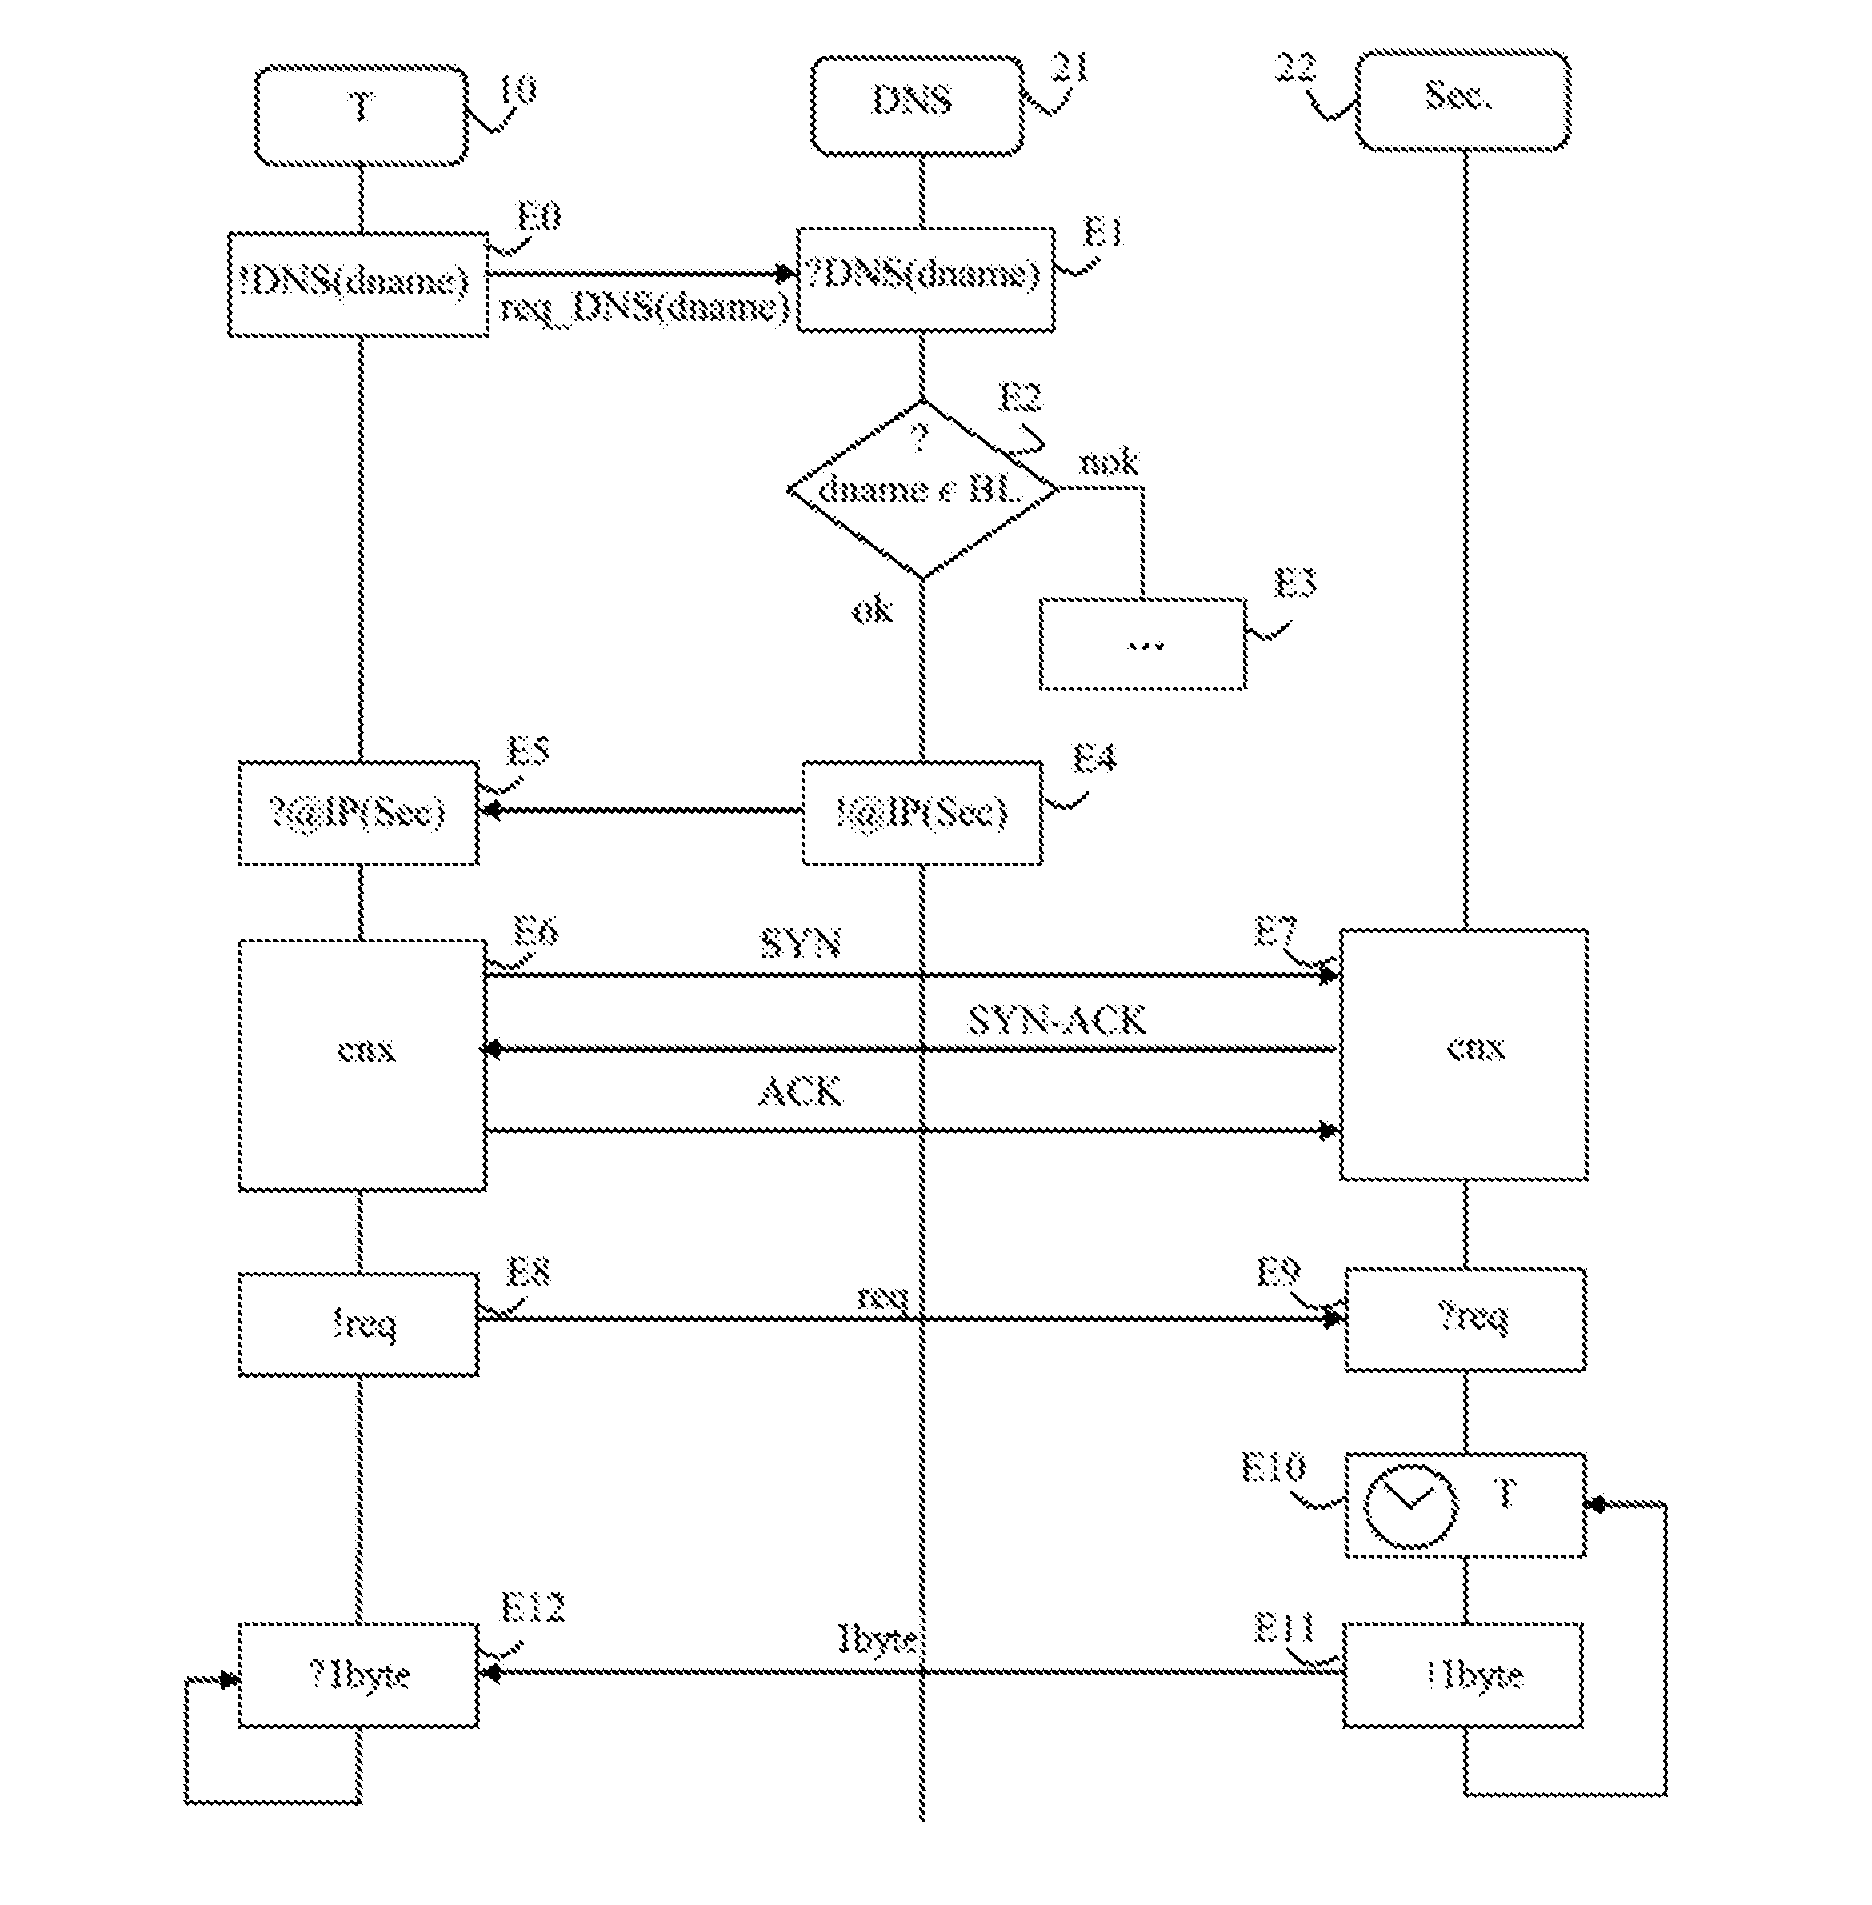 Method of slowing down a communication in a network